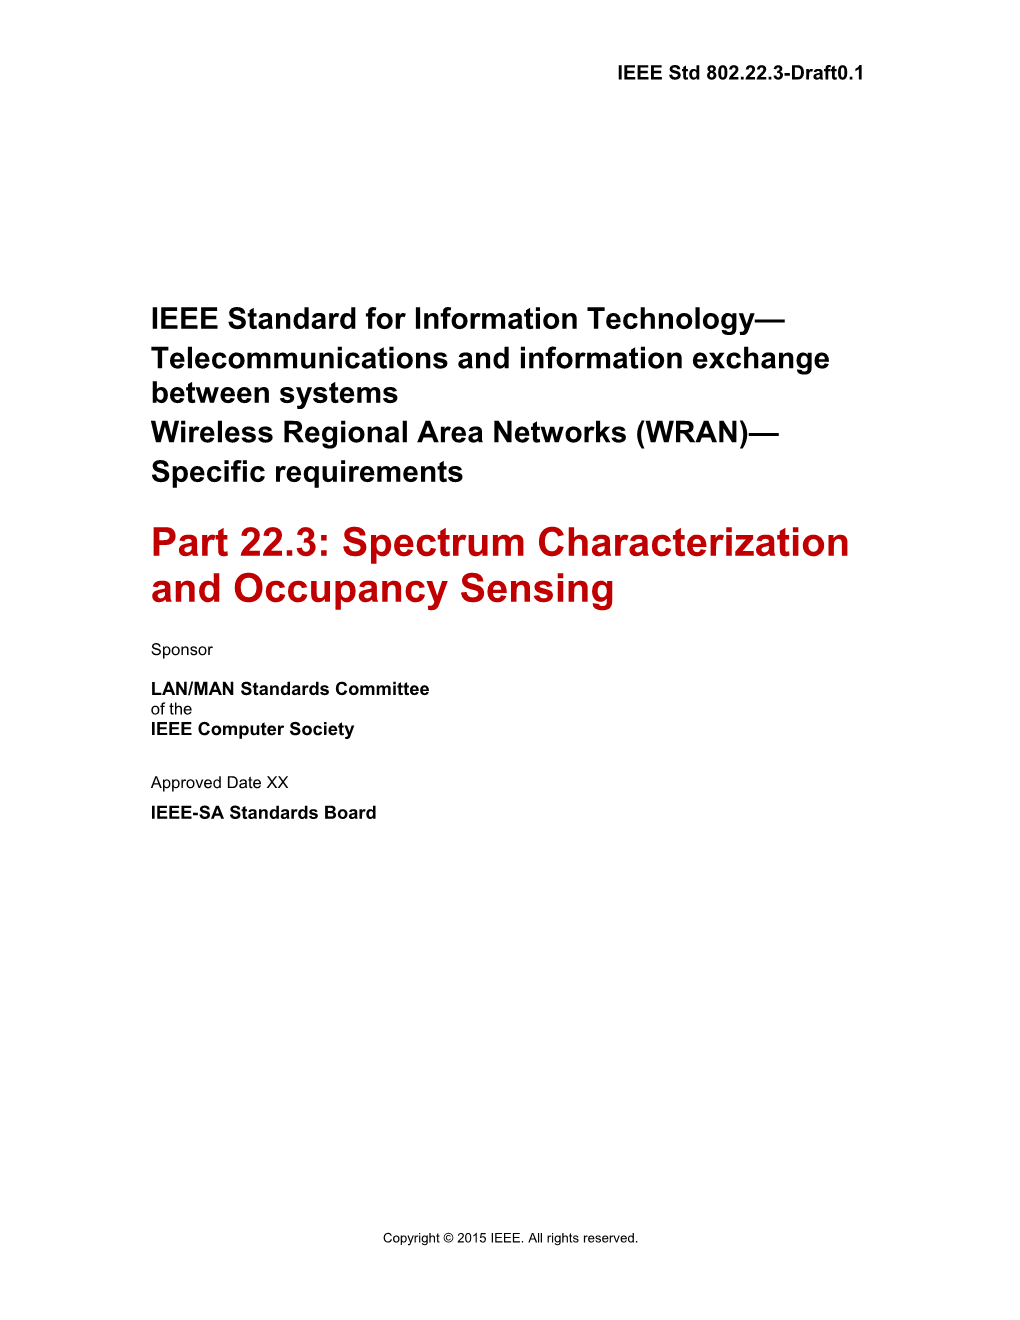 IEEE Standard for Information Technology